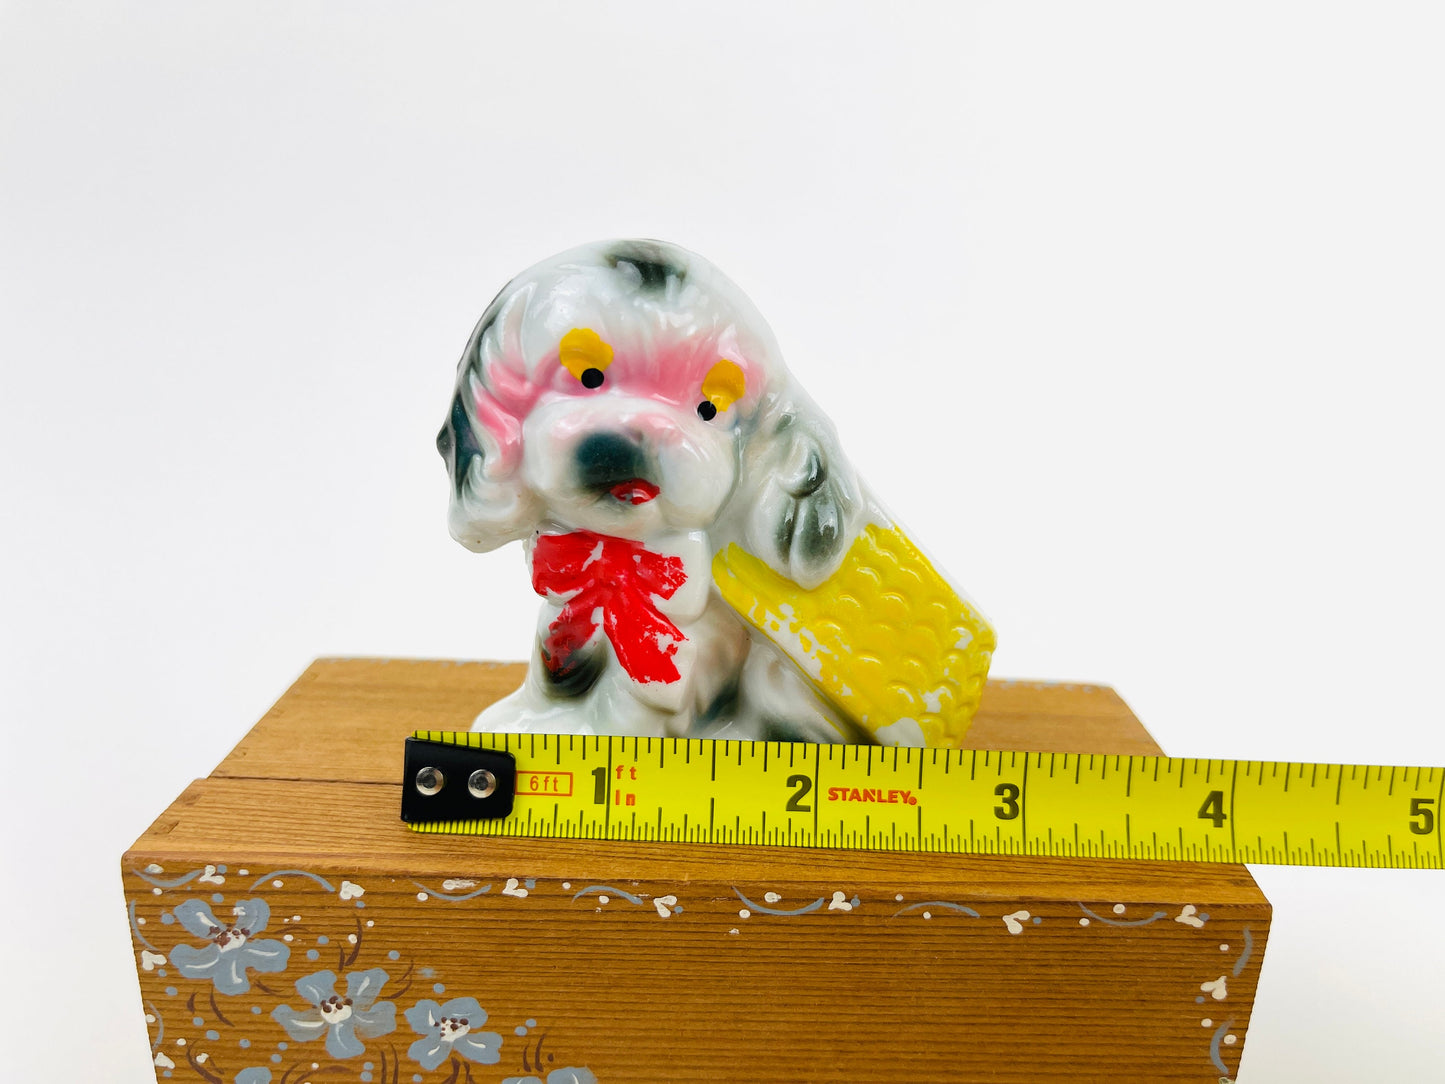 Vintage Puppy wearing a Bow and Basket Flat Ceramic Kitschy Mid Century Figurine Made in Japan